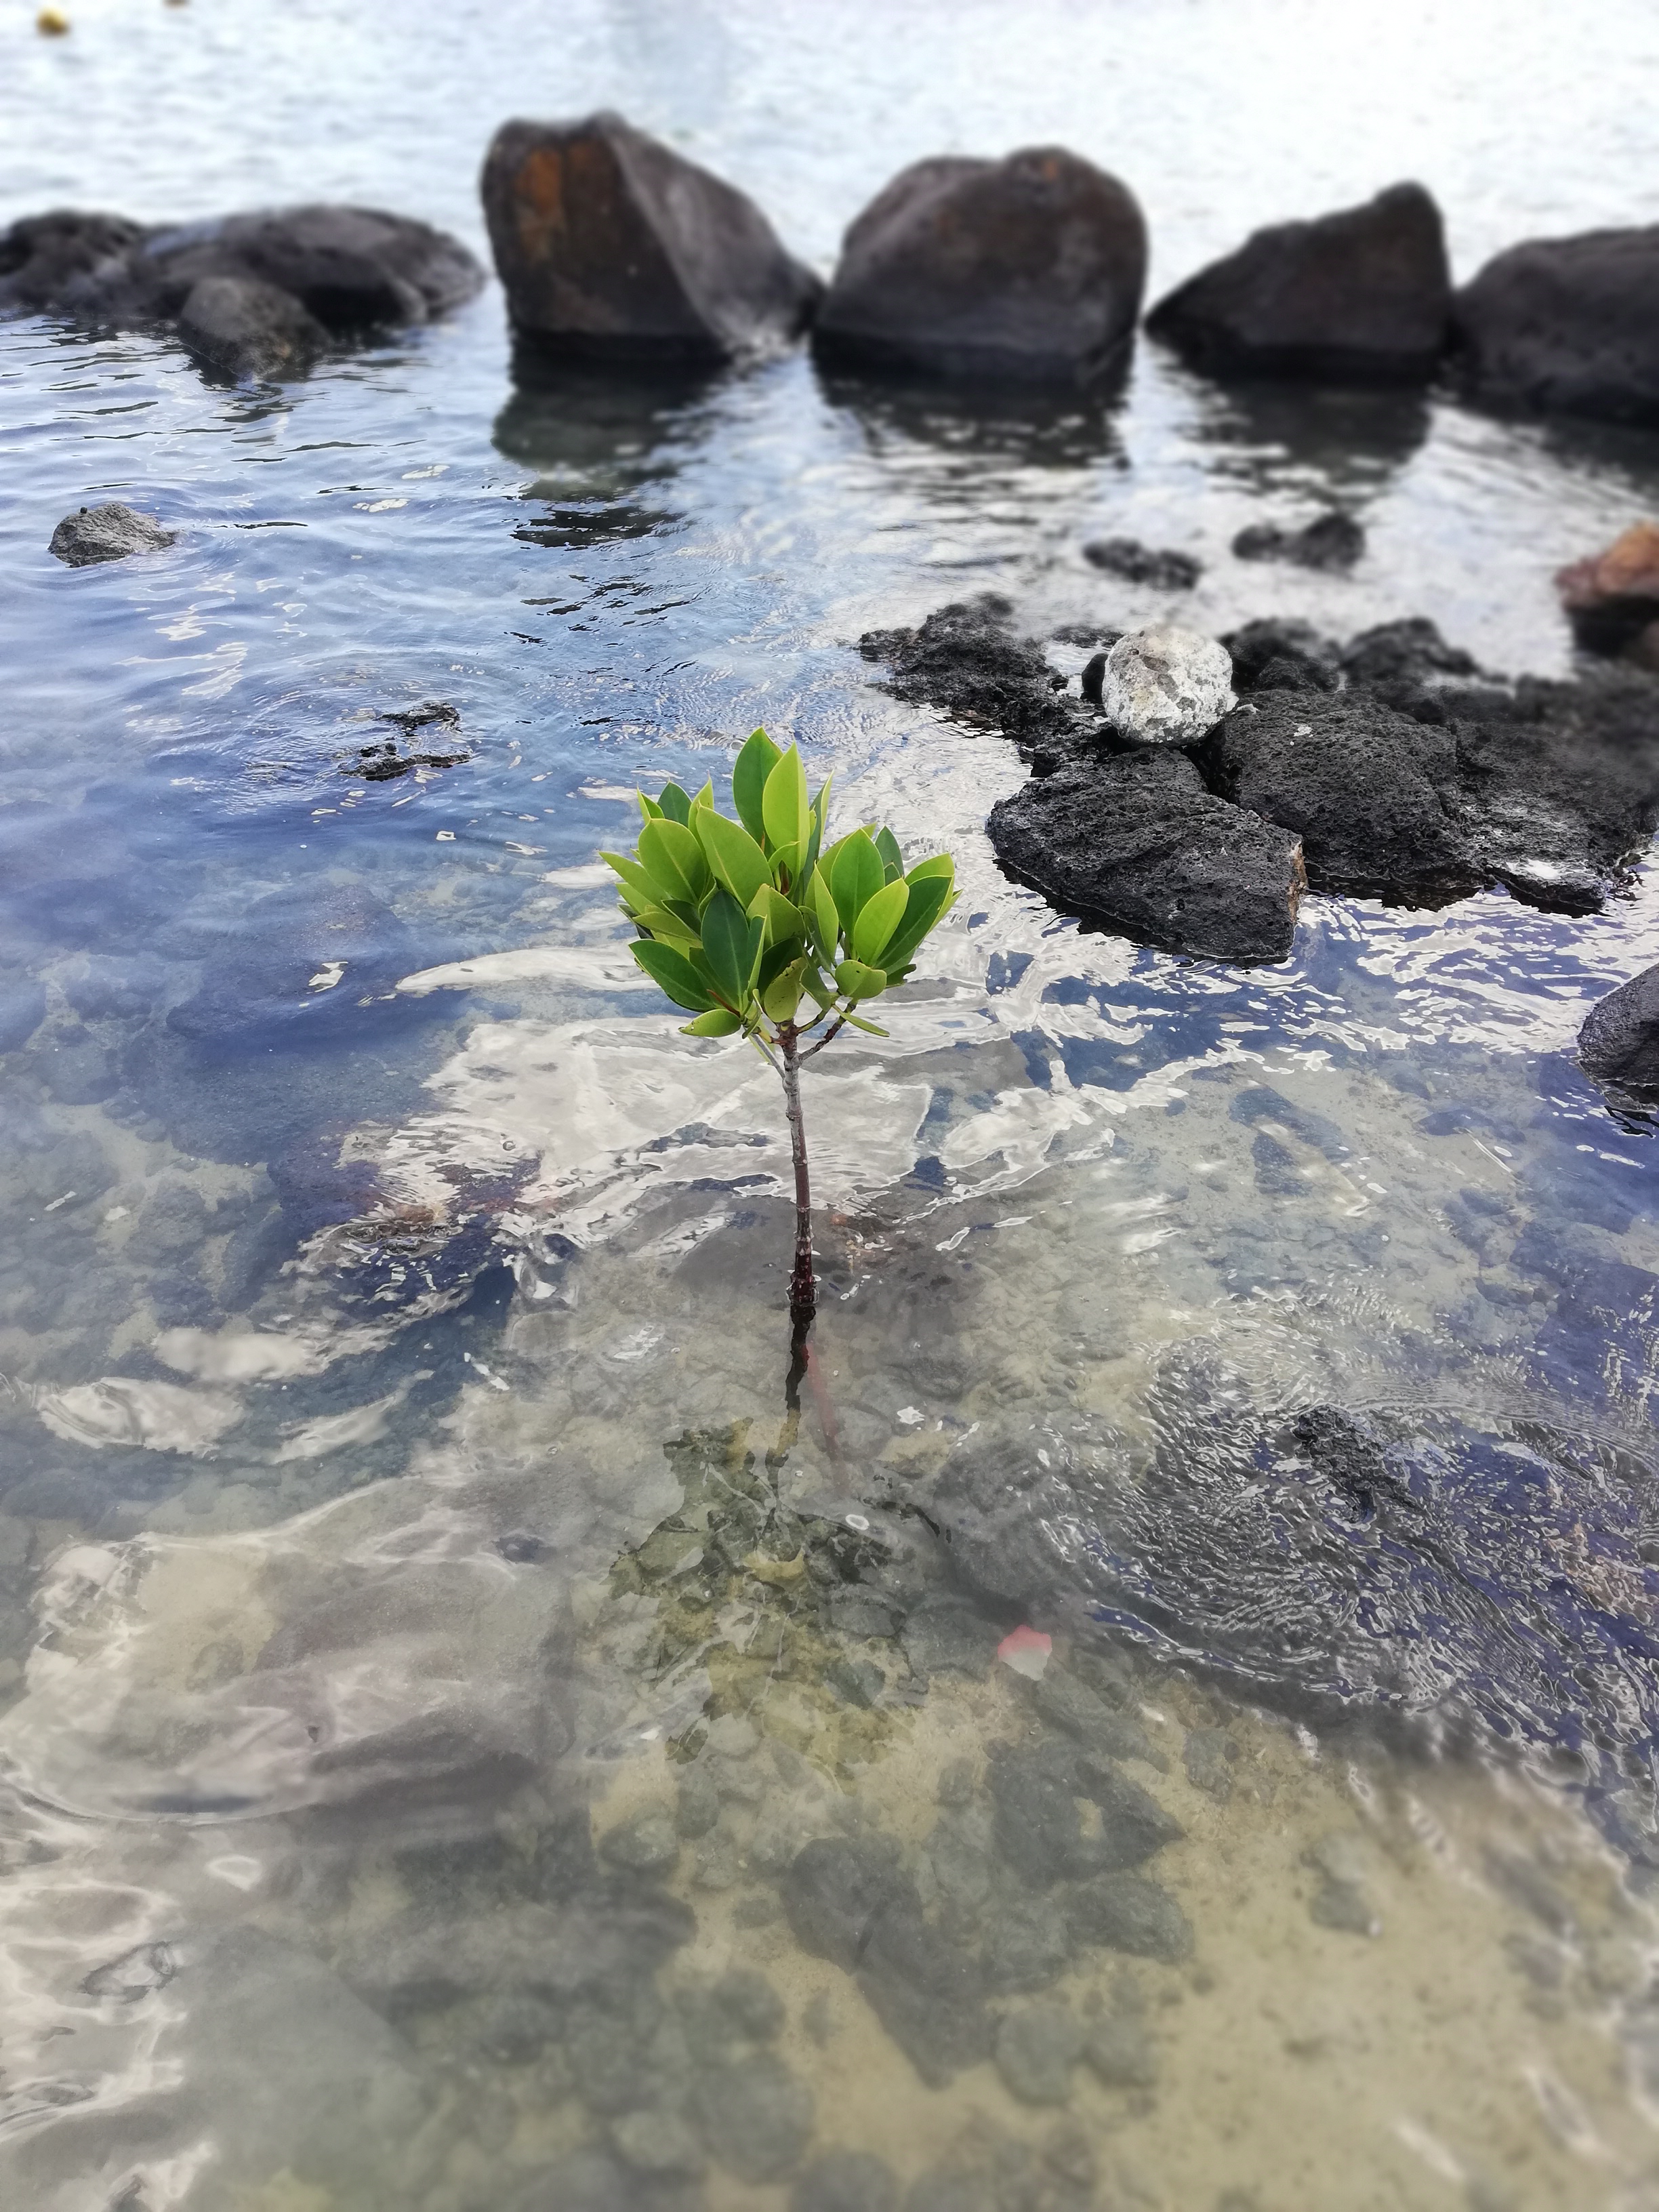 Mangrove Mauritius Island, Trou aux Biches, lone mangrove plant growing in the shallow seawater with rocks at the back; mangroves importance